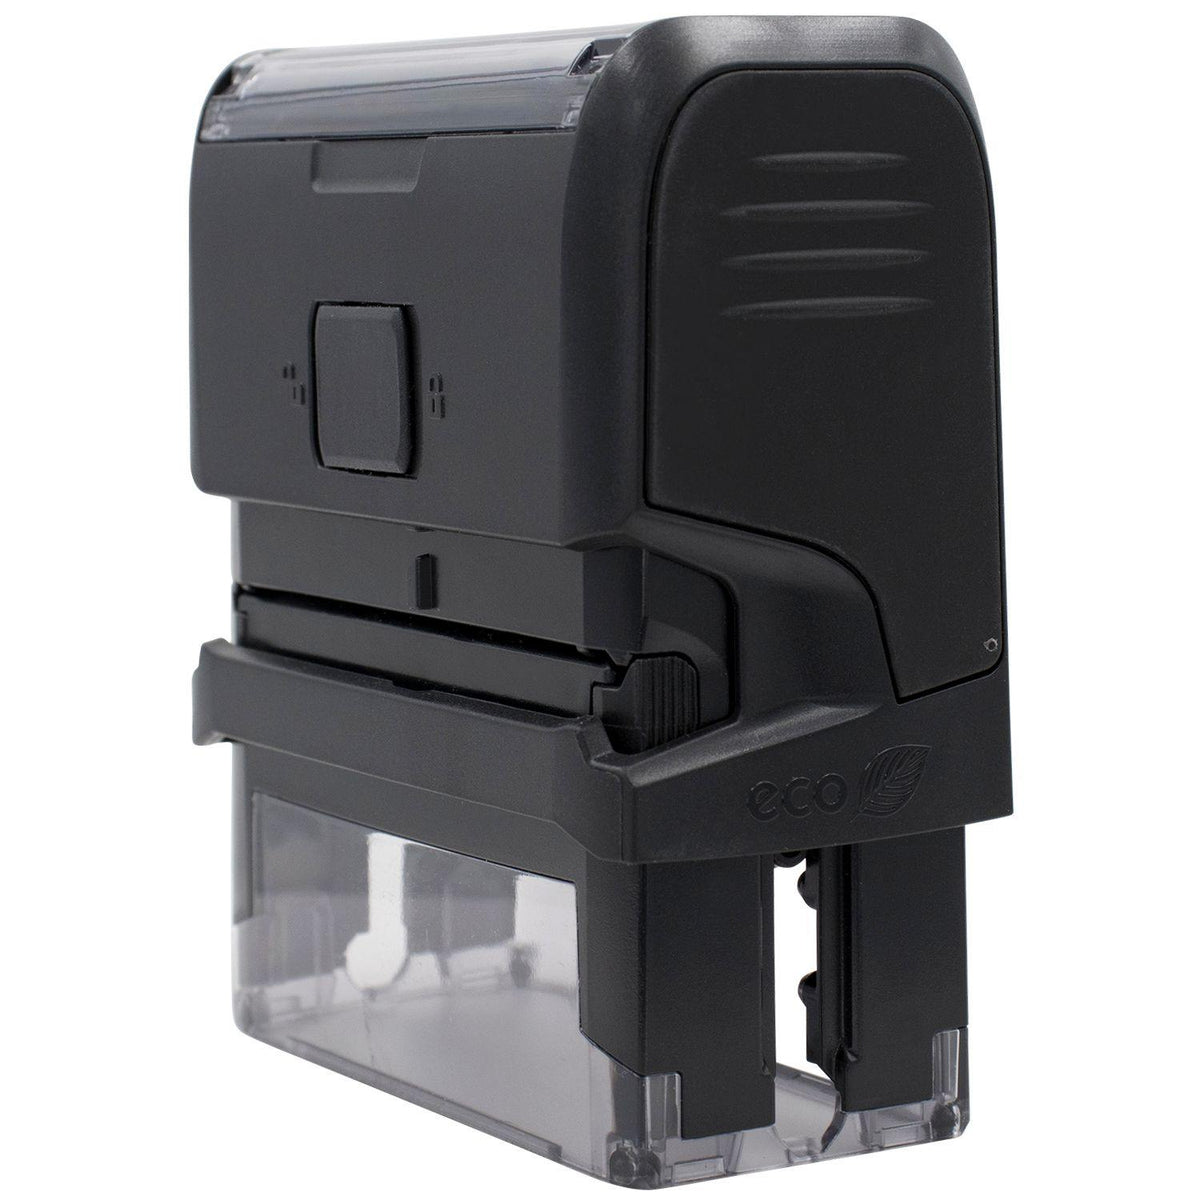 Self Inking Advanced Placement Stamp - Engineer Seal Stamps - Brand_Trodat, Impression Size_Small, Stamp Type_Self-Inking Stamp, Type of Use_Teacher